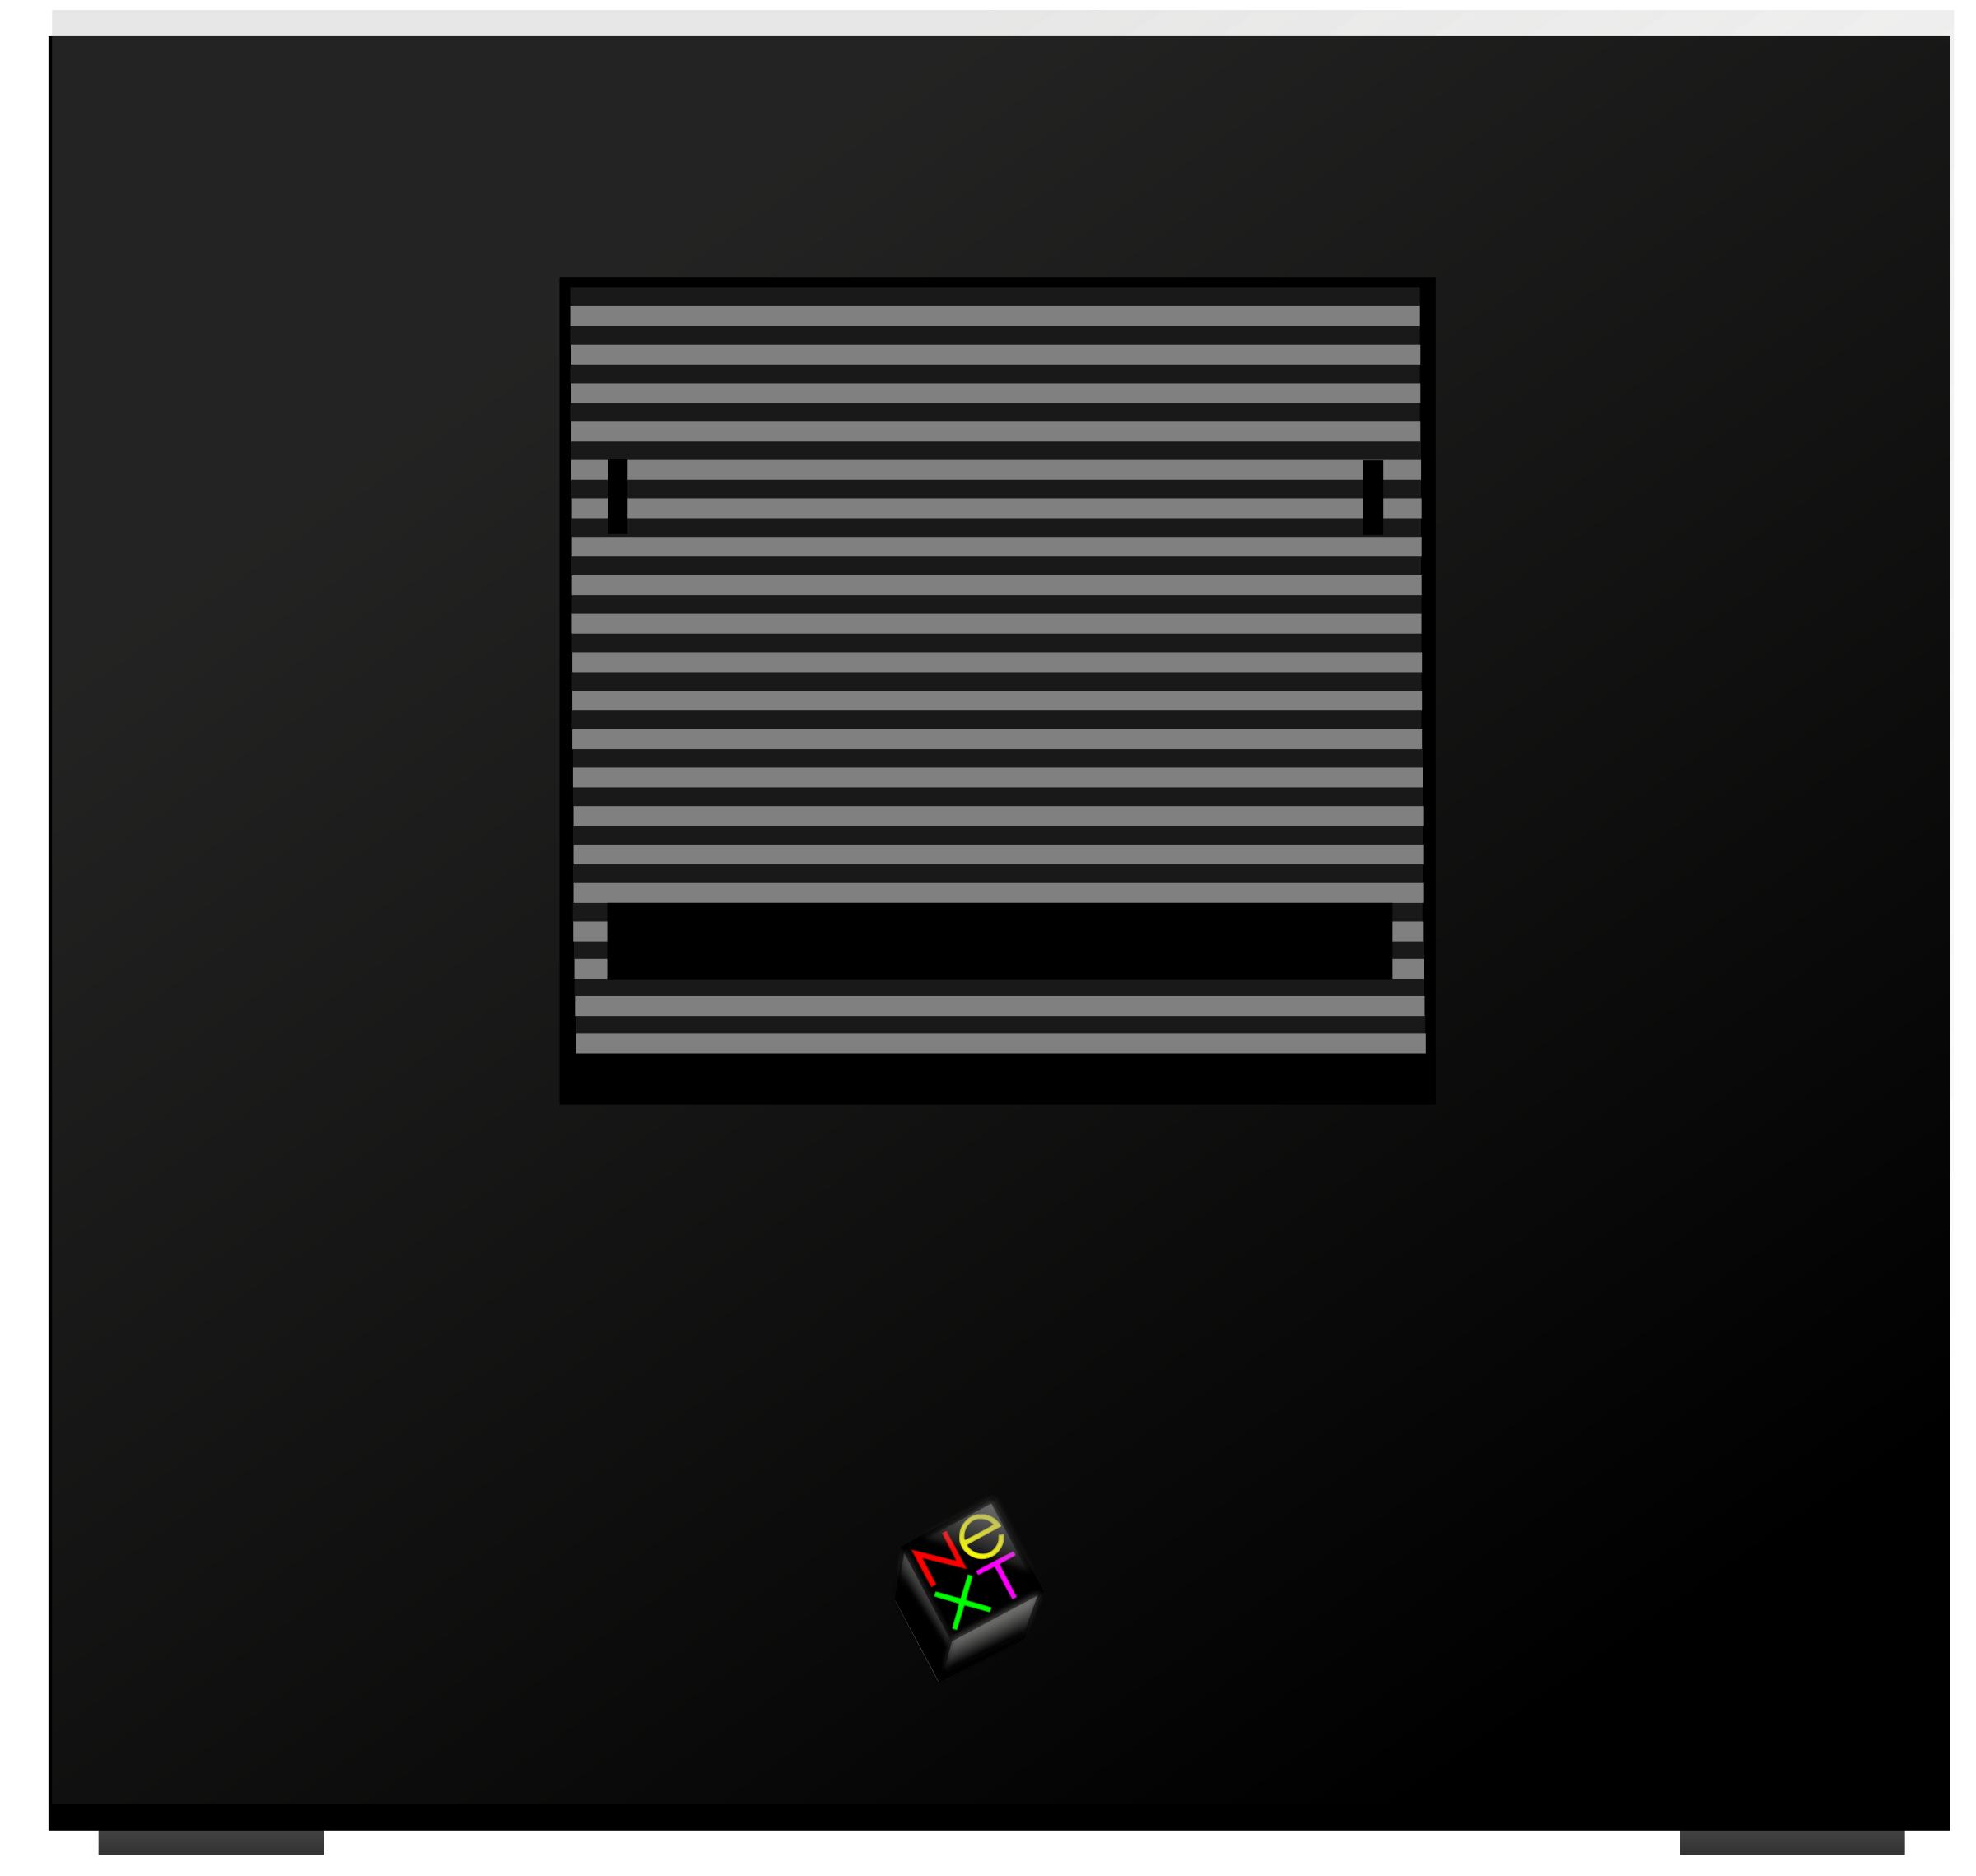 NeXT Cube/Personal Mainframe png